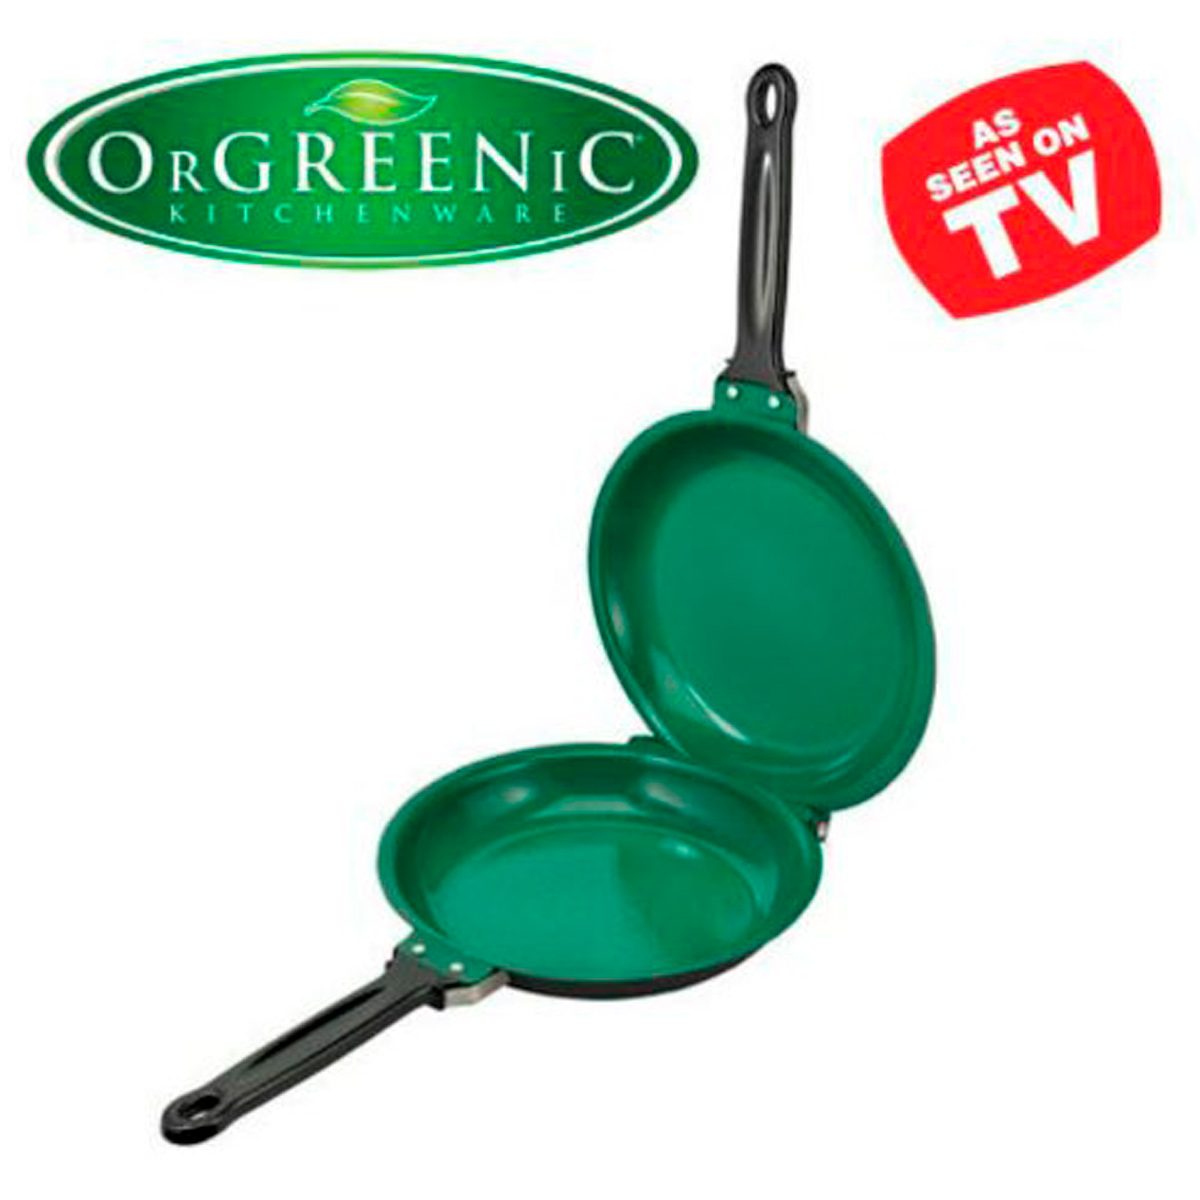 10 'As Seen on TV' Cooking Products That Actually Work